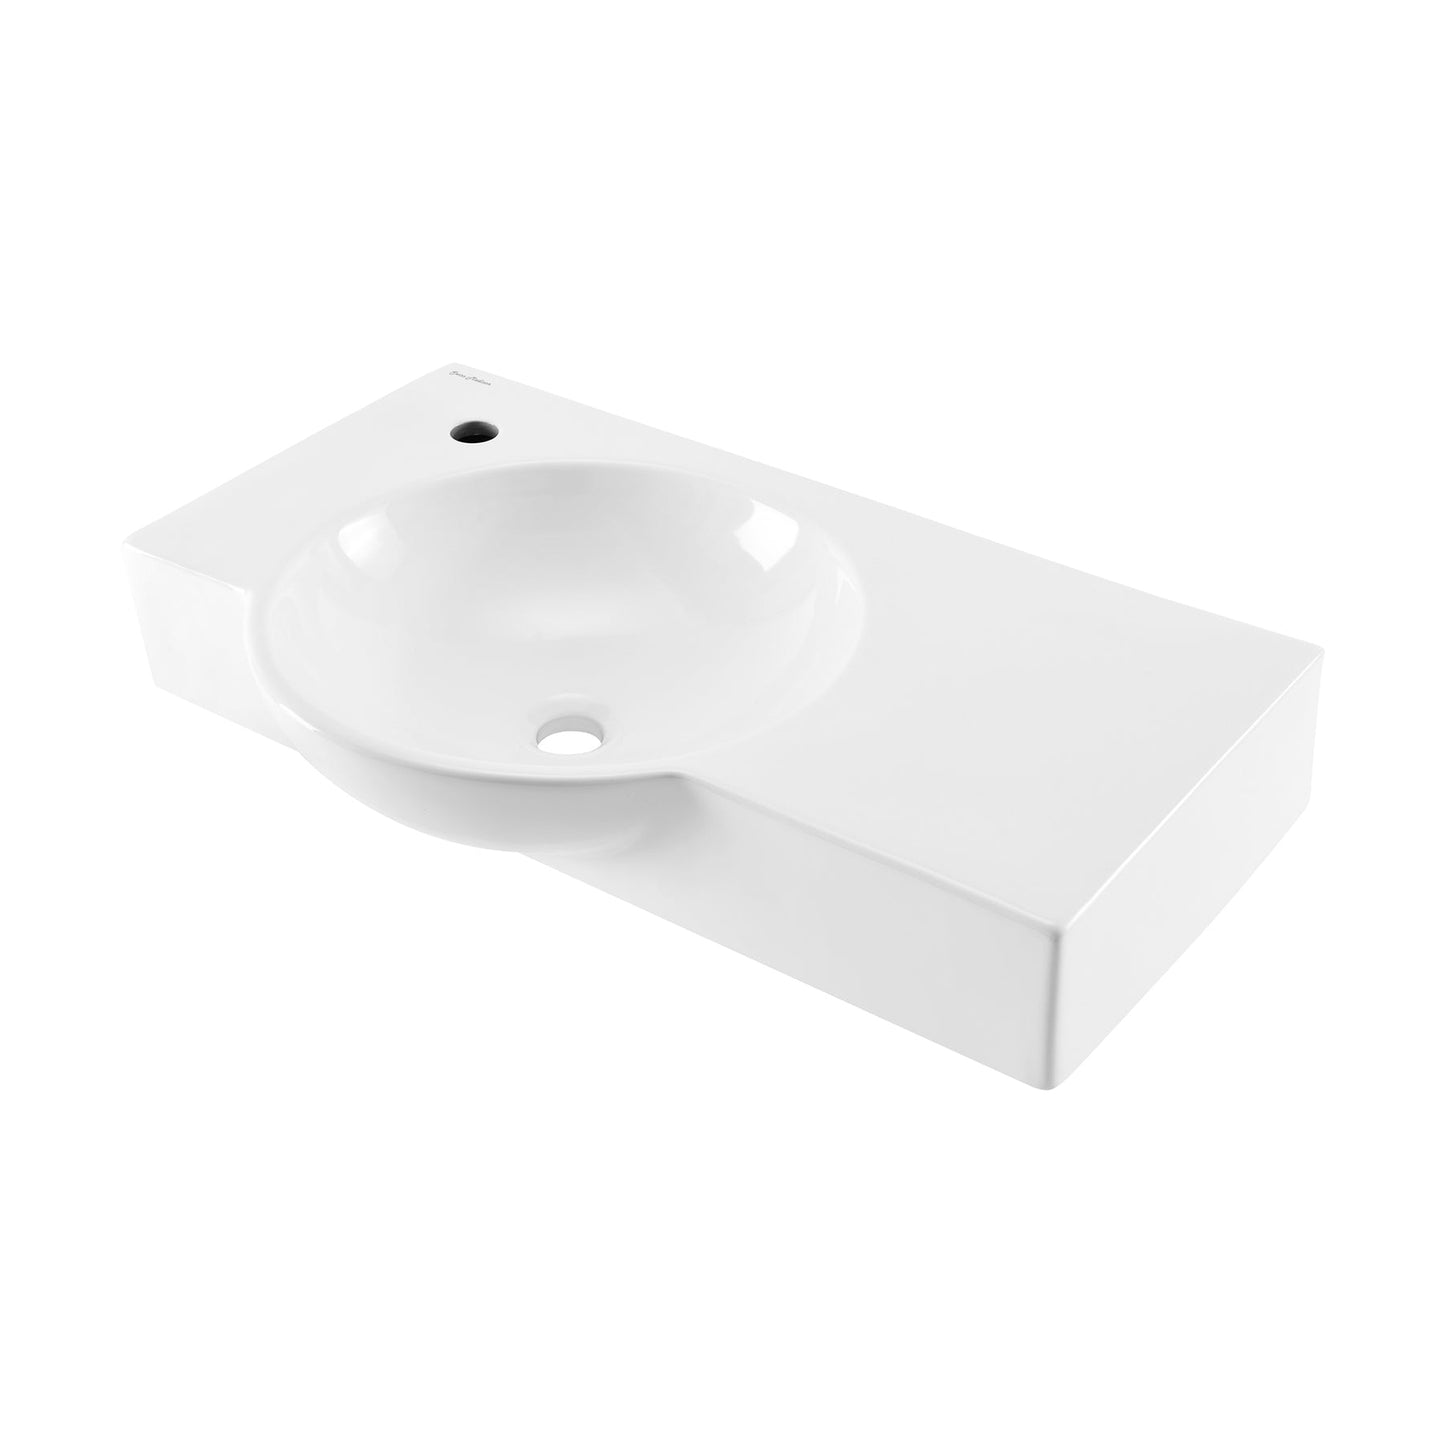 Swiss Madison Château 30" x 18" Rectangular White Ceramic Wall-Hung Bathroom Sink With Left Side Single Hole Faucet